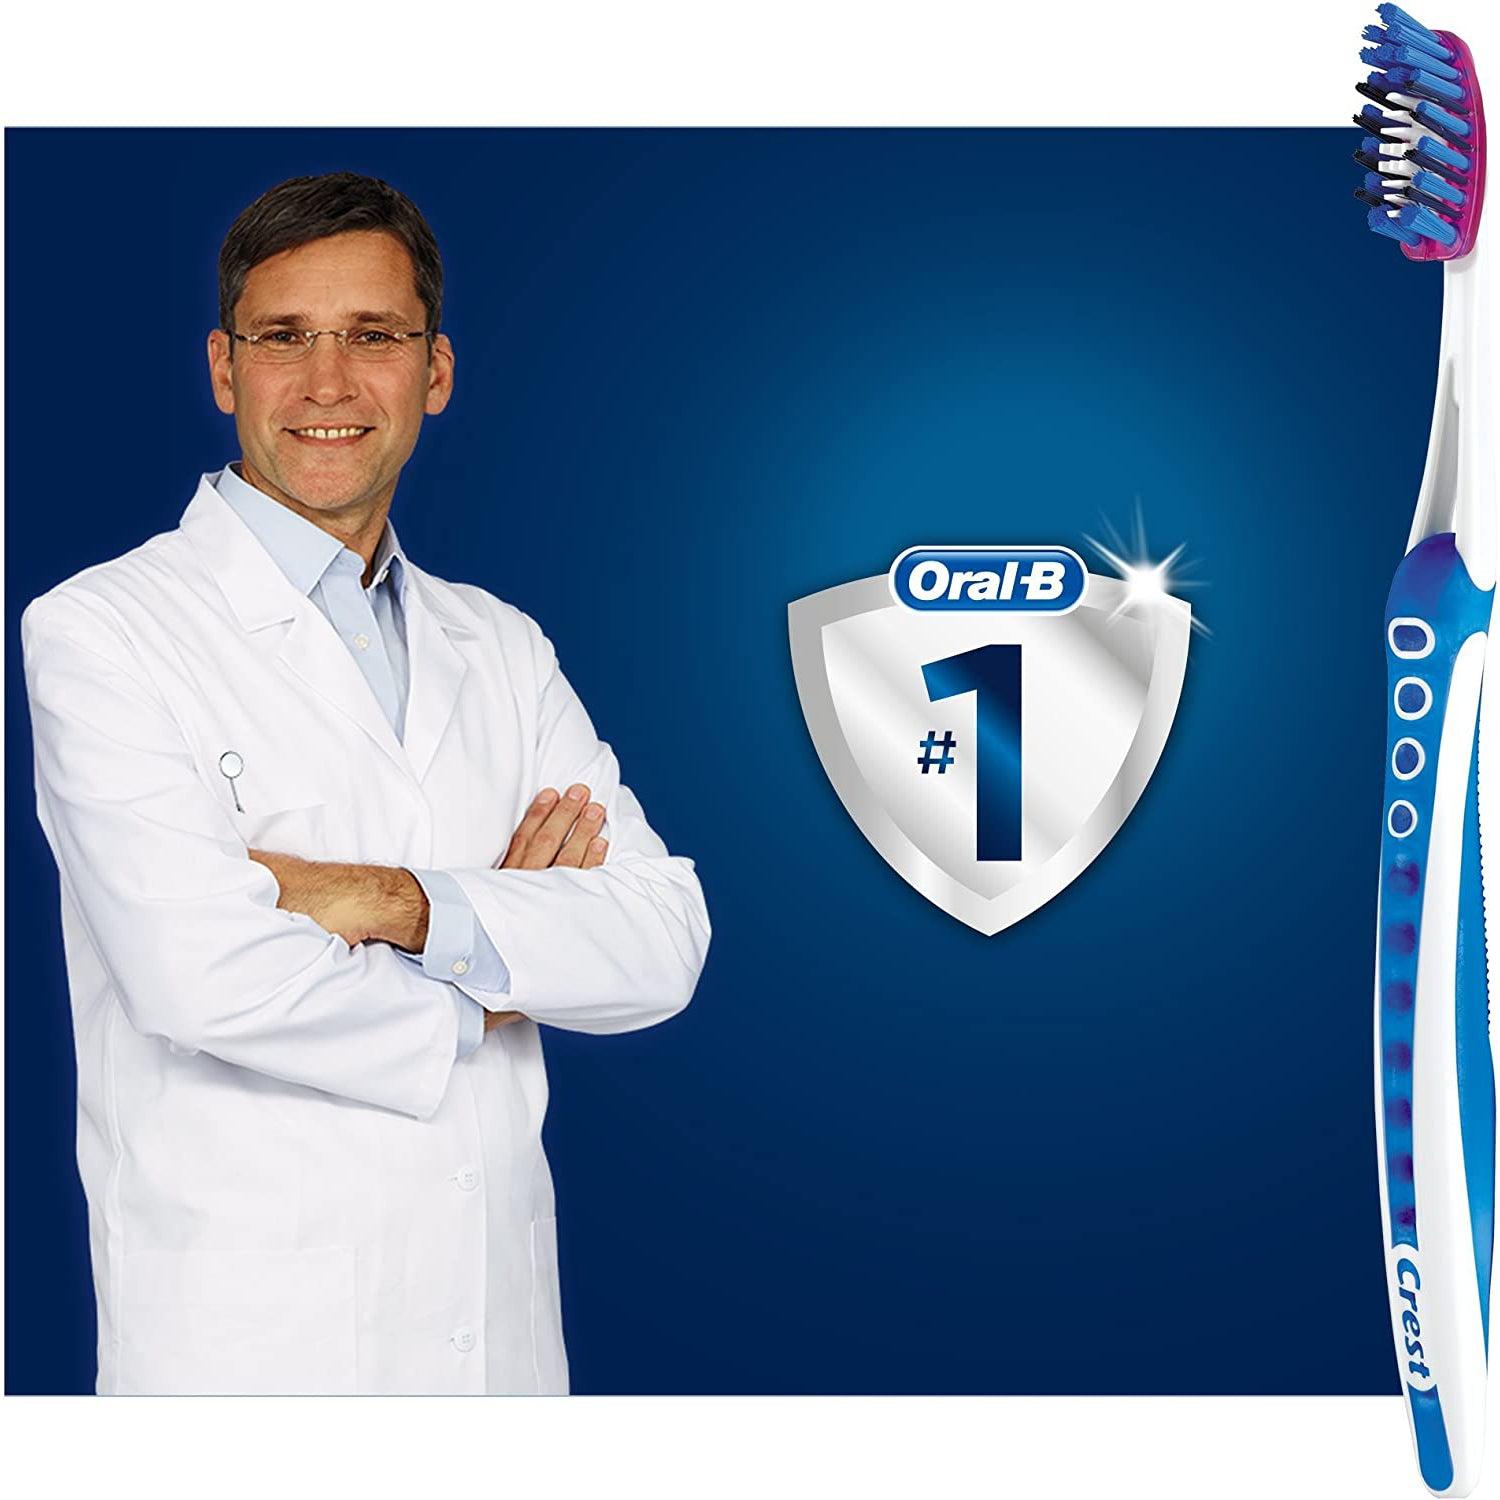 Oral-B 3D White Luxe Pro-Flex Manual Toothbrush, Medium 38 - Healthxpress.ie